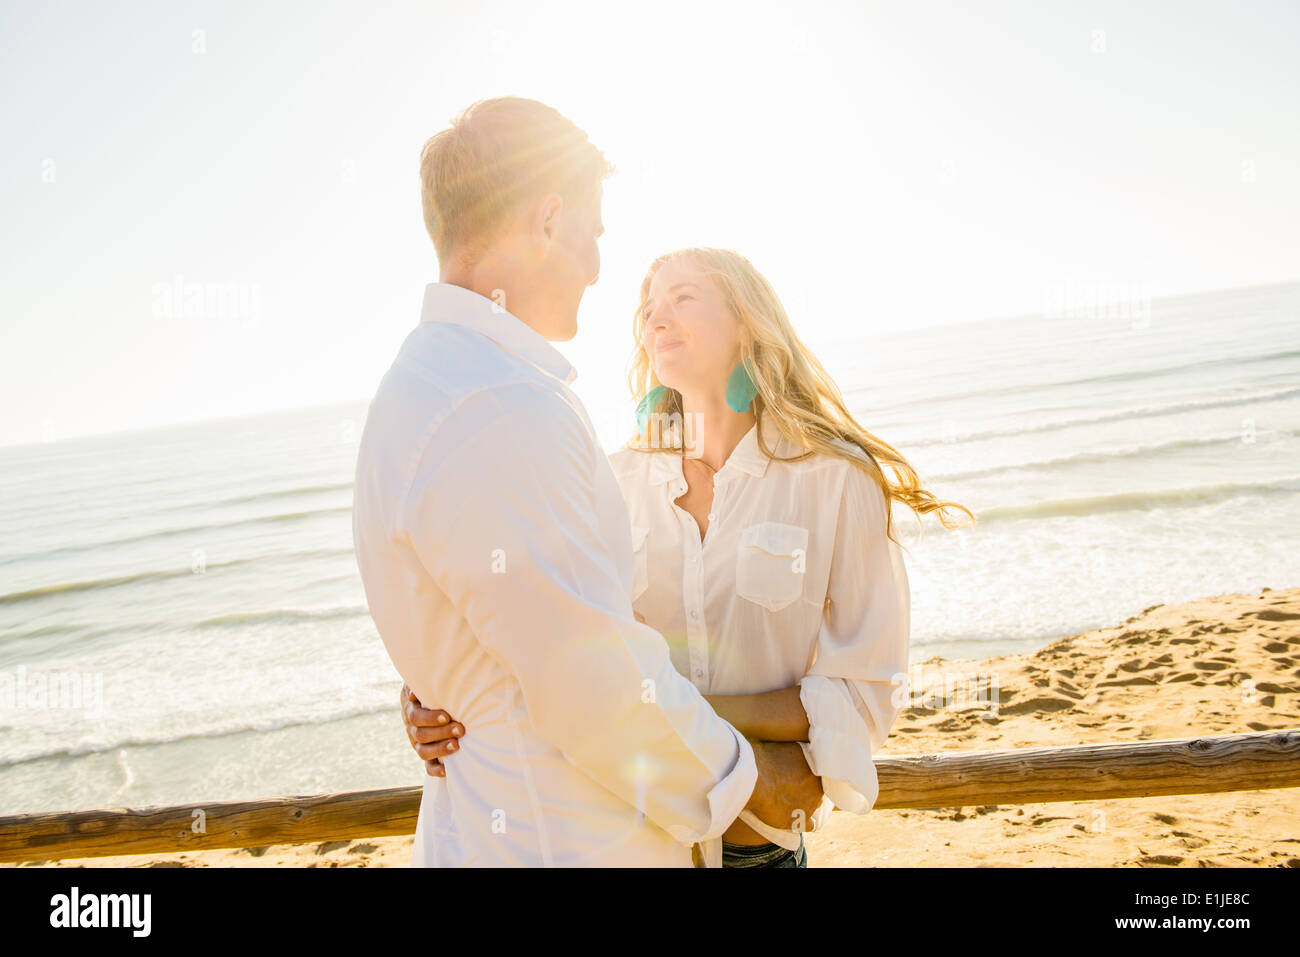 Romantic young couple with arms around each other at coast Stock Photo